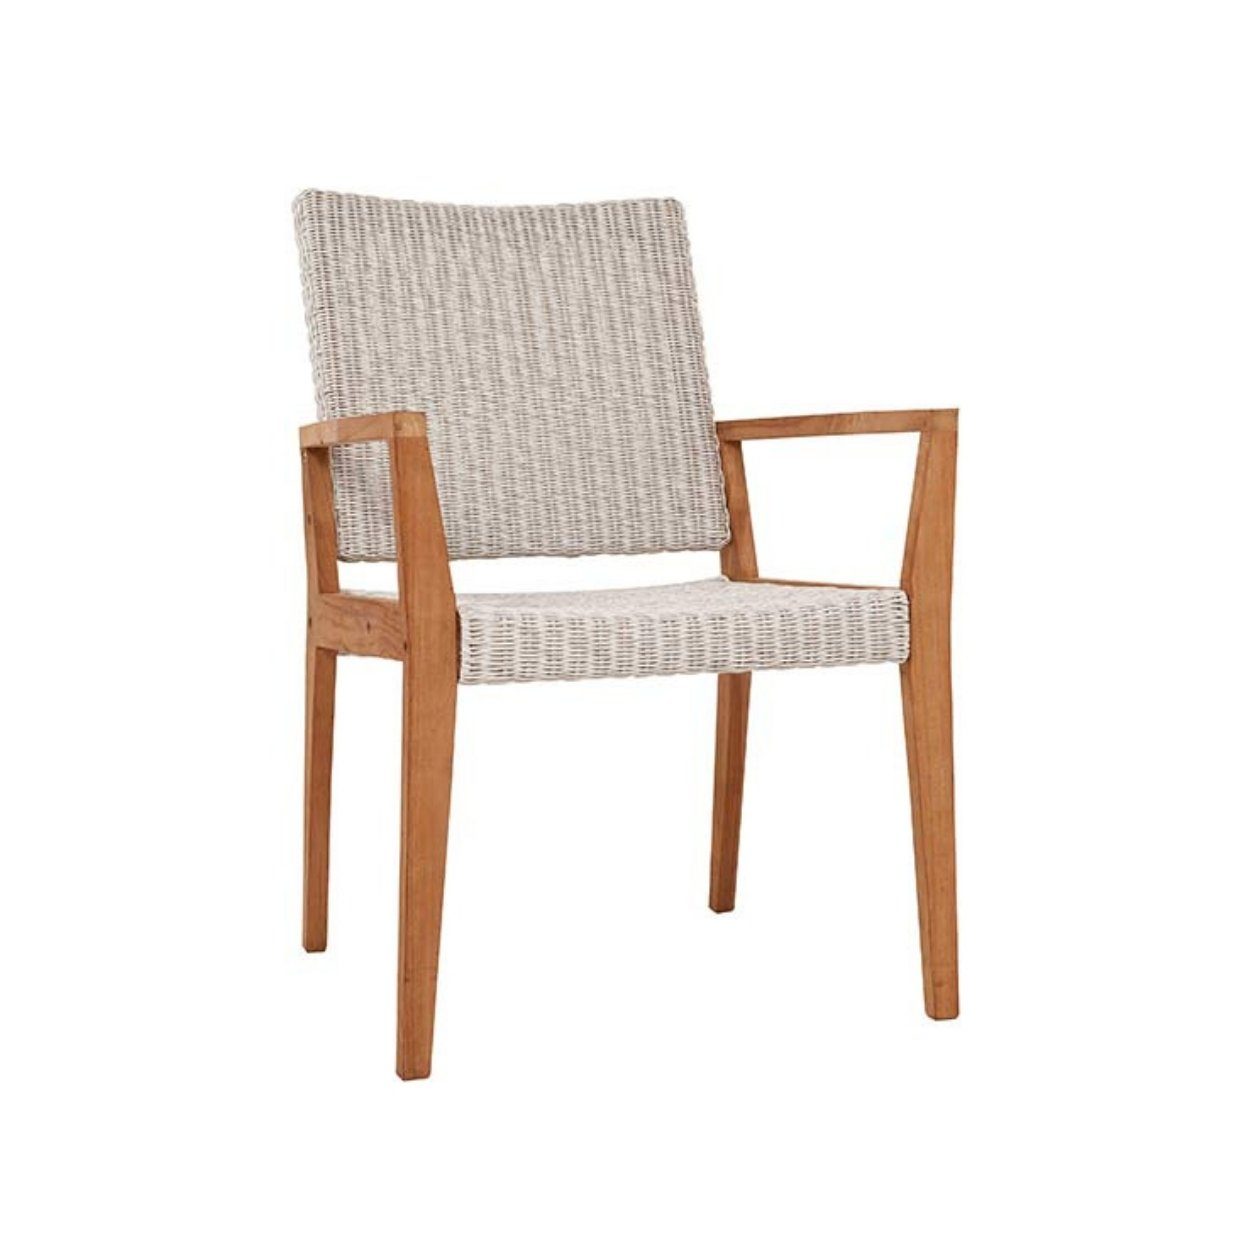 Chairs - Winton Wicker Chair